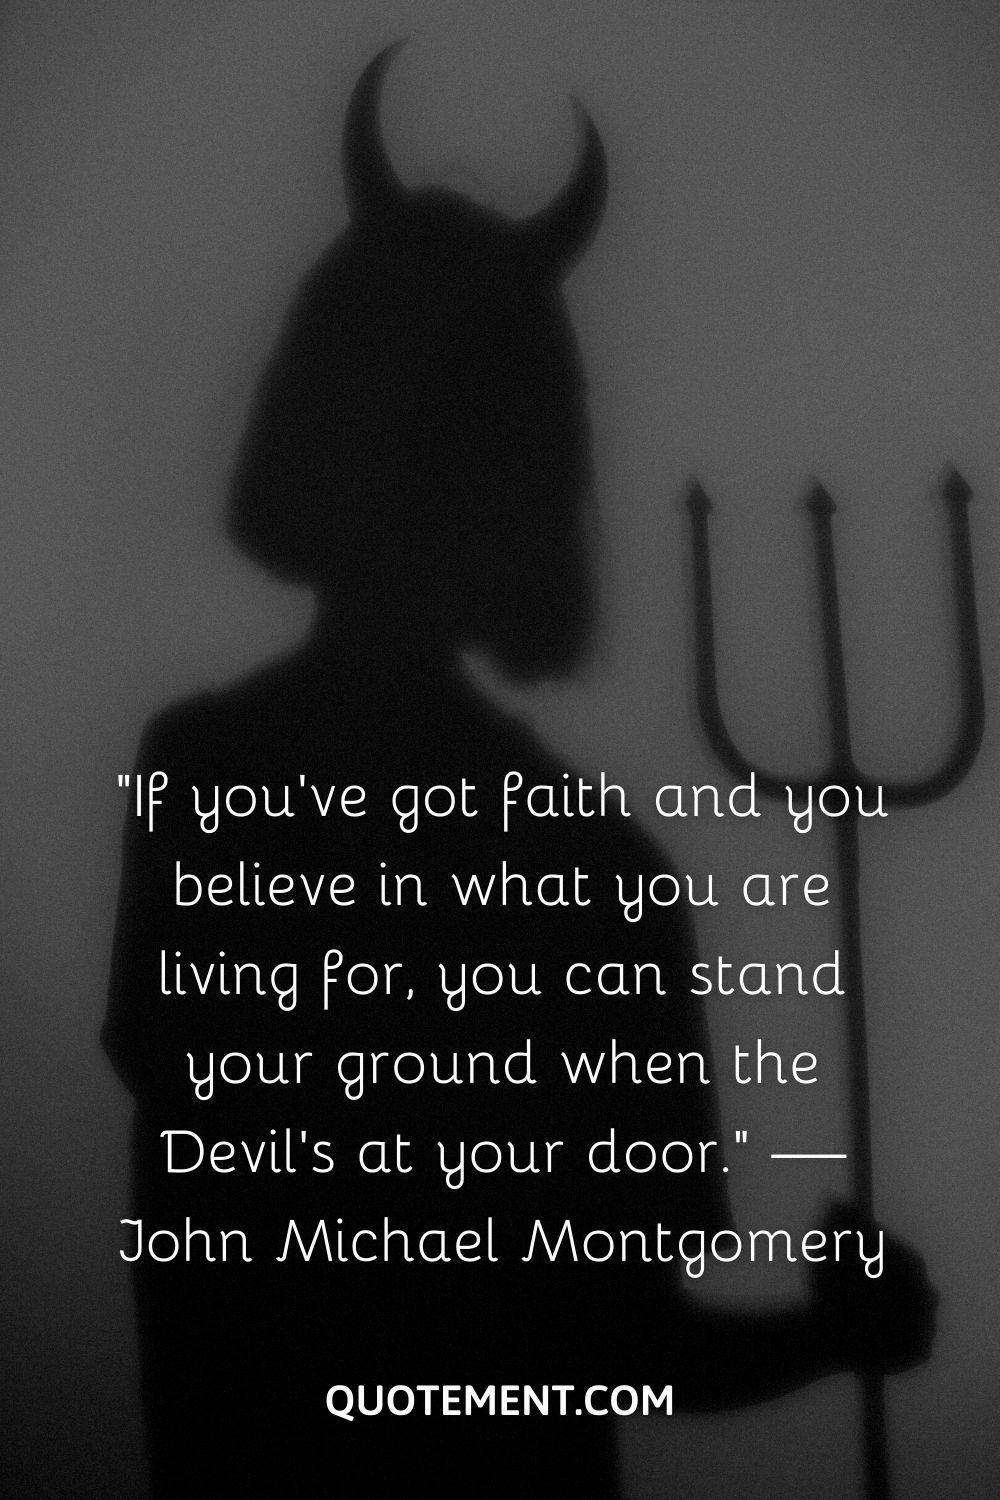 “If you’ve got faith and you believe in what you are living for, you can stand your ground when the Devil’s at your door.” — John Michael Montgomery